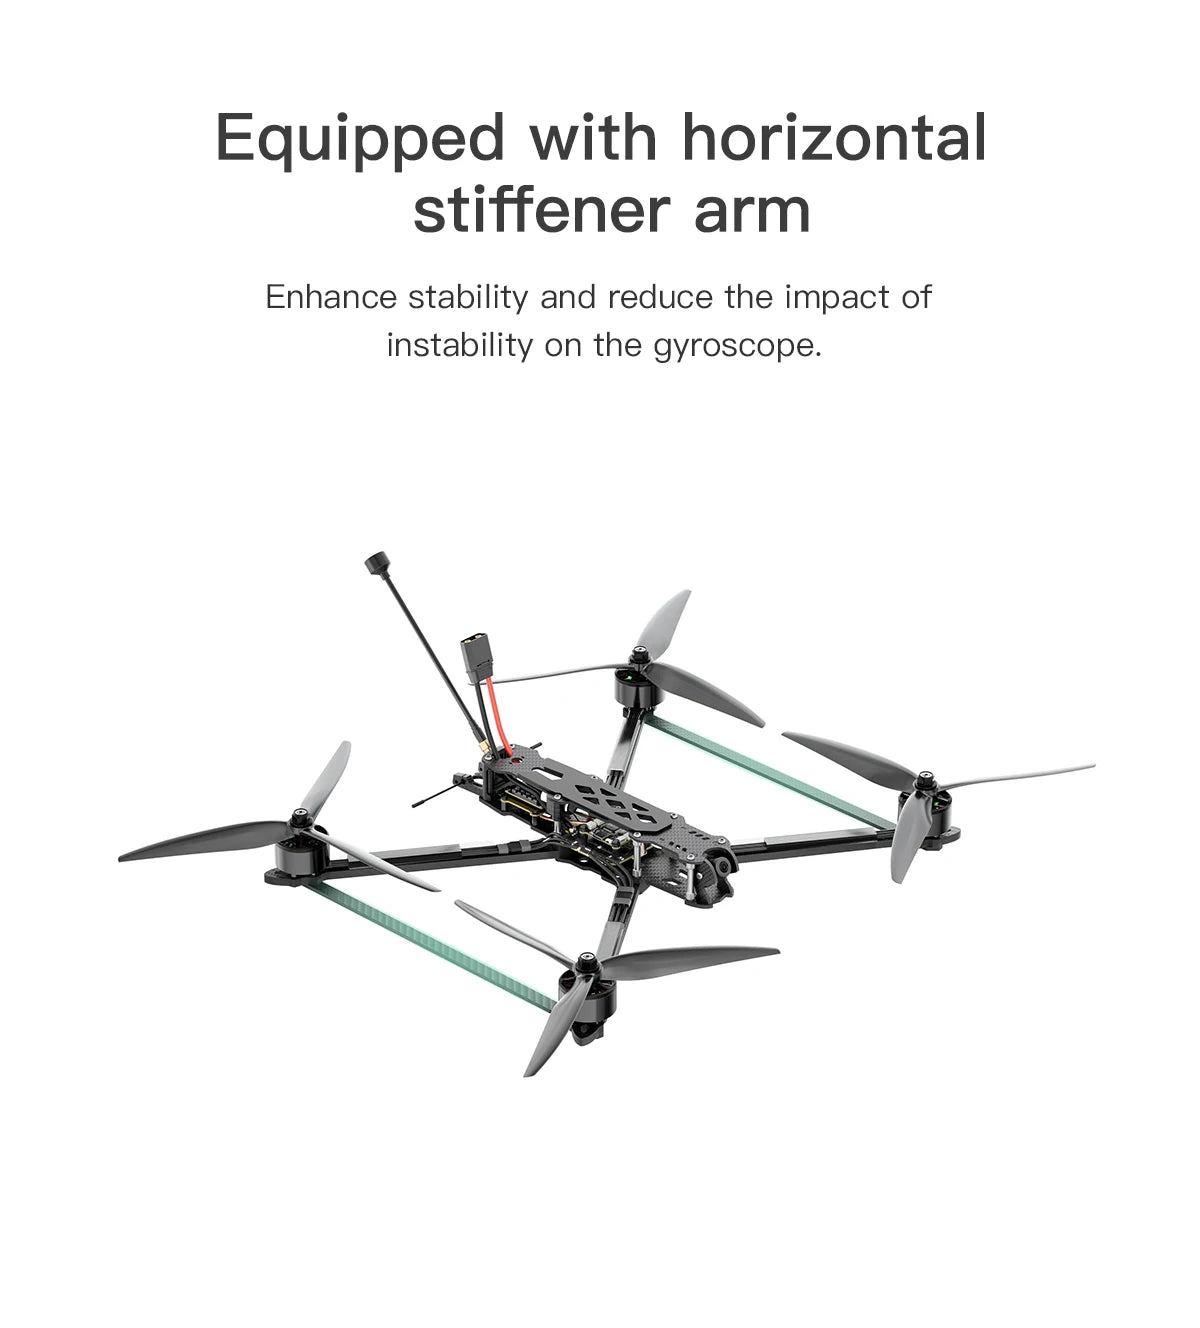 GEPRC MARK4 LR10 5.8G 2.5W Long Range FPV, Equipped with horizontal stiffener arm Enhance stability and reduce the impact of instability on the